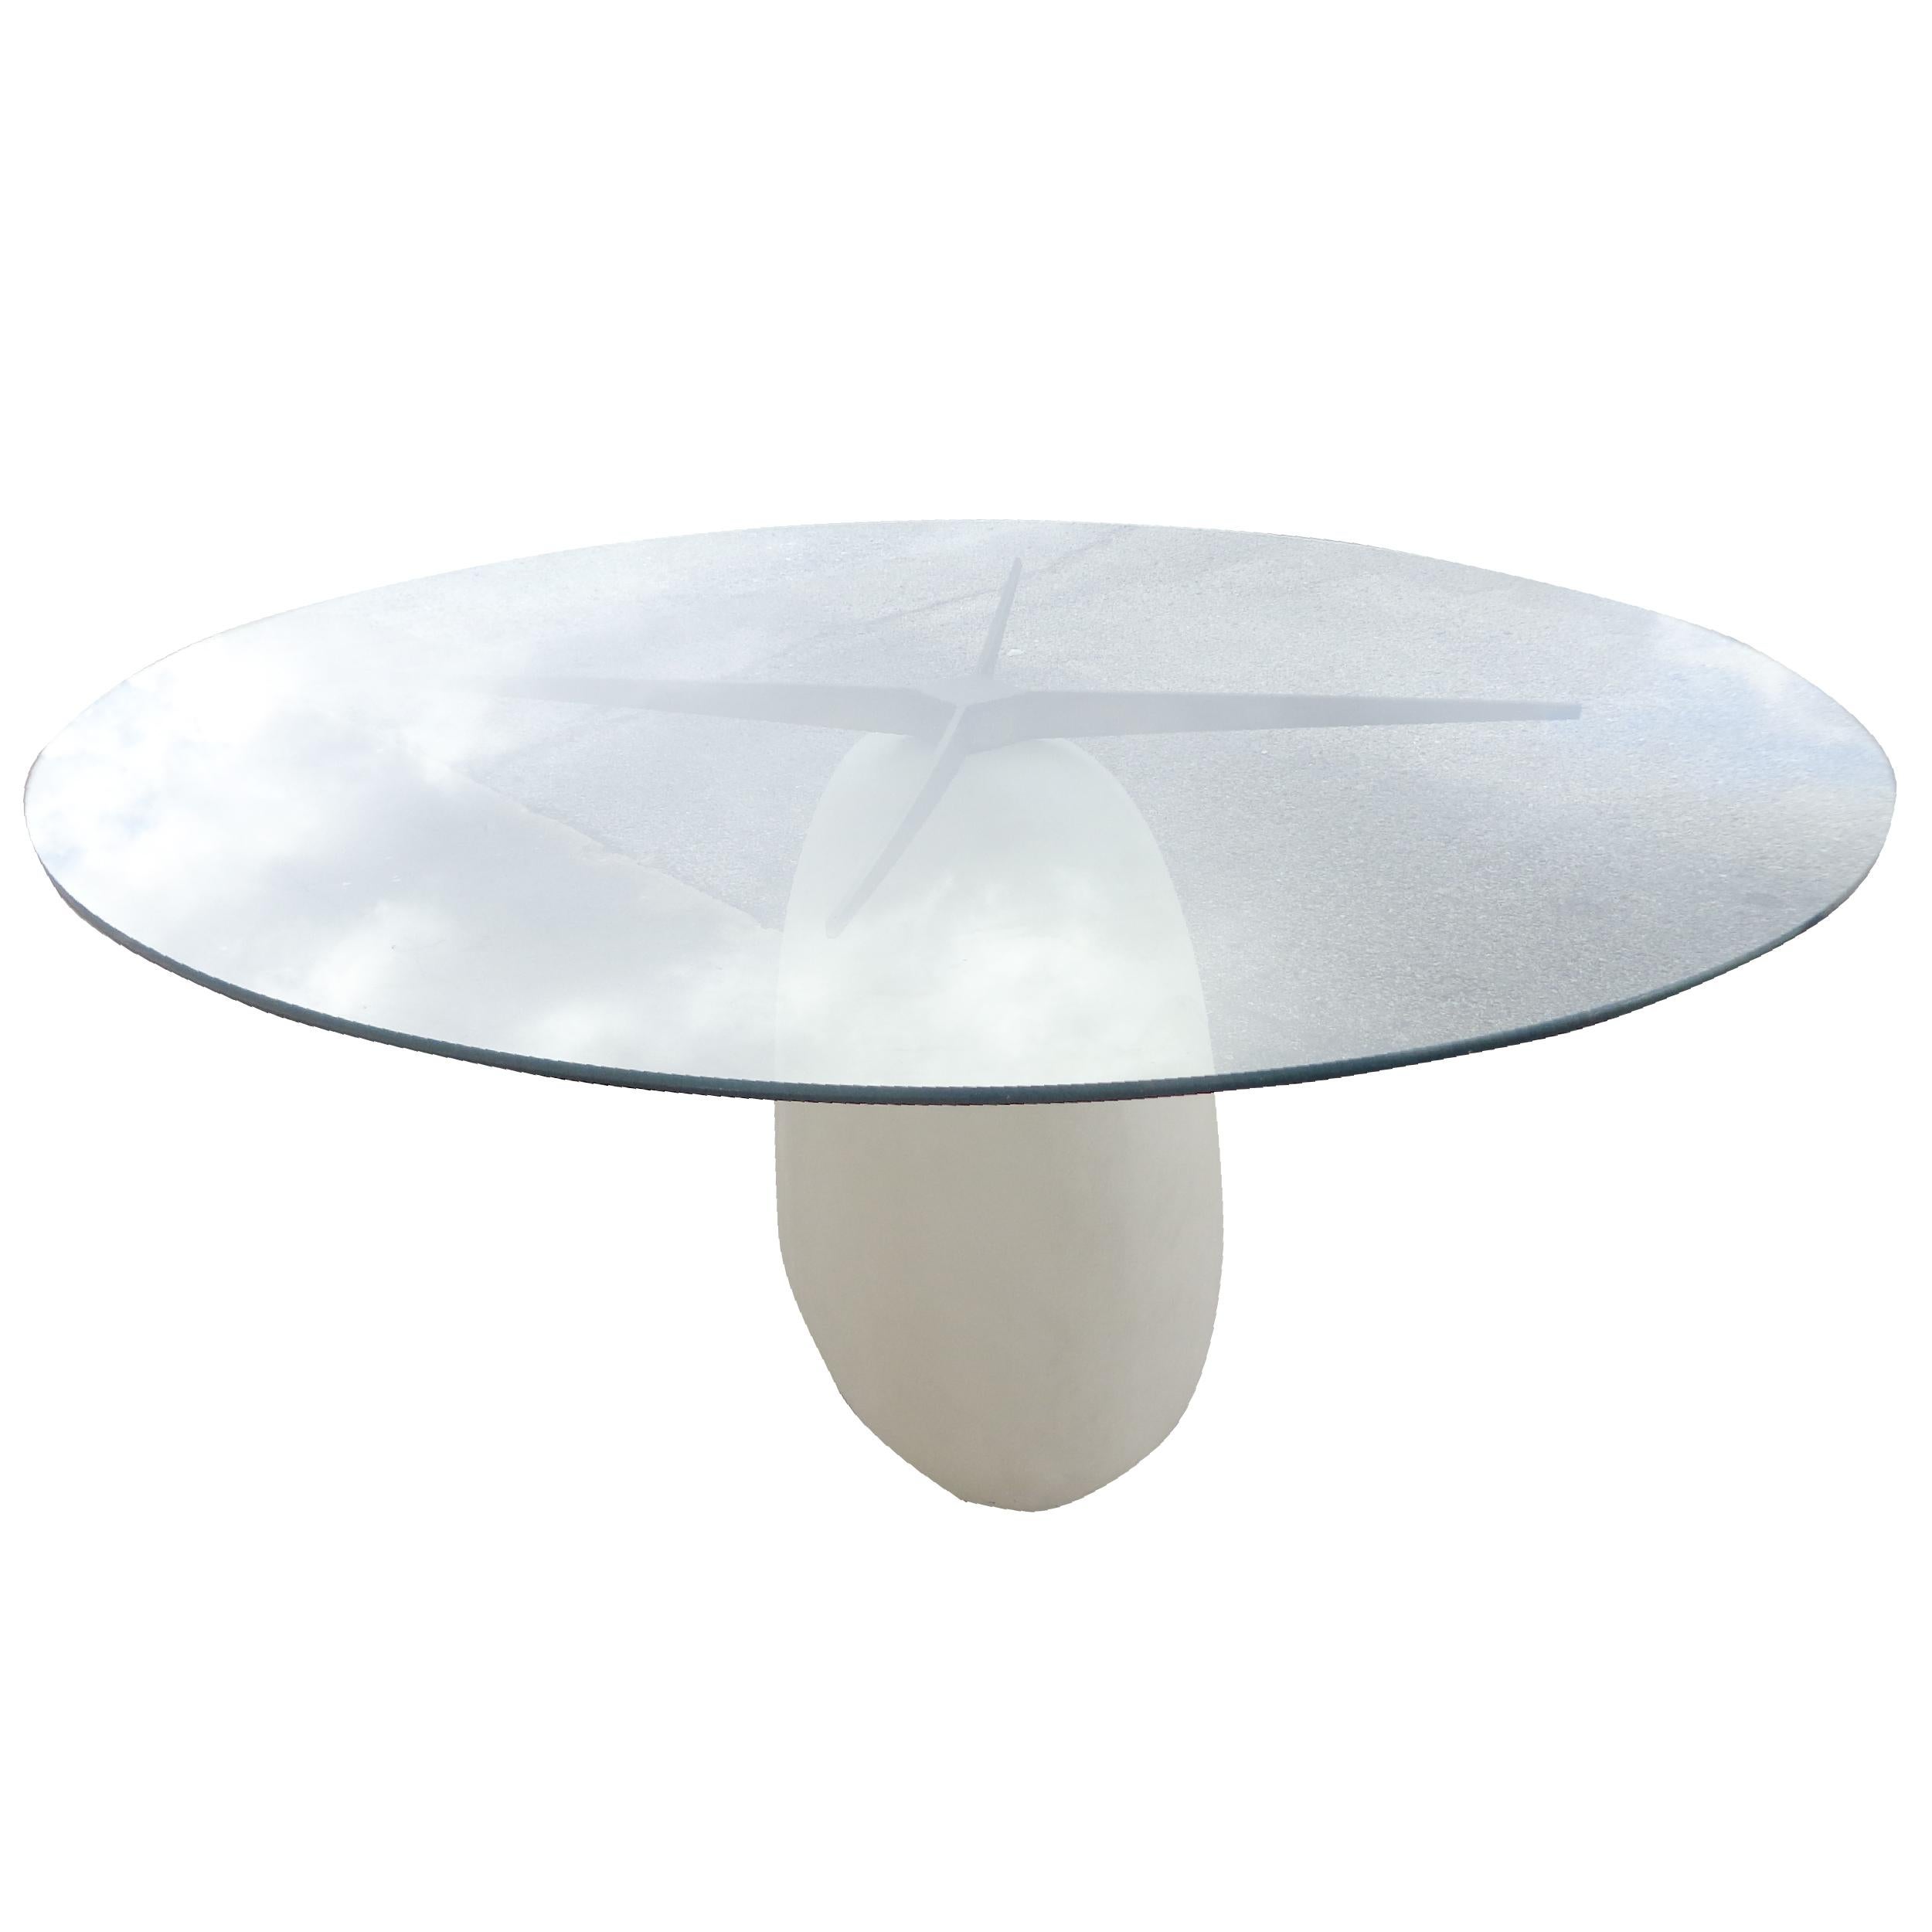 Minimalist Modern Sculptural Cast Composition Base with Glass Top Dining Table